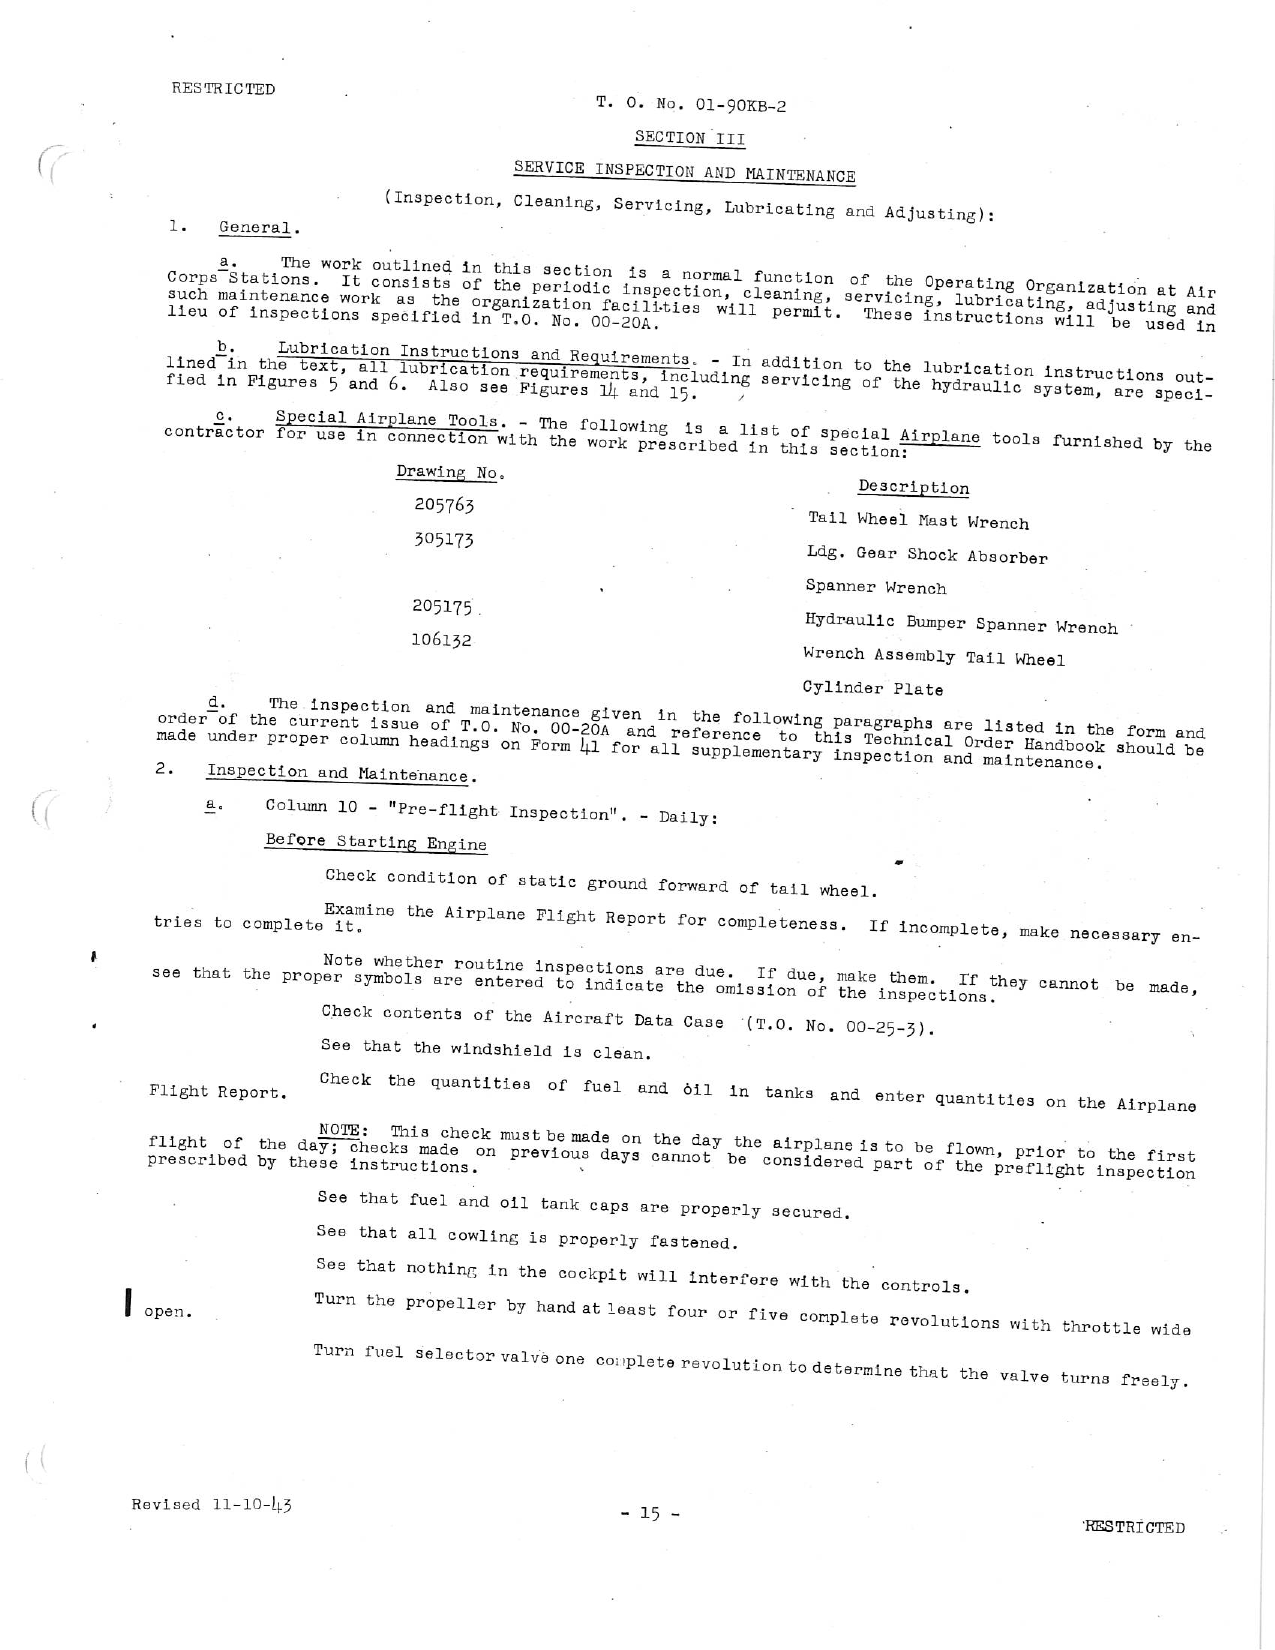 Sample page 3 from AirCorps Library document: Erection and Maintenance Instructions for AT-10